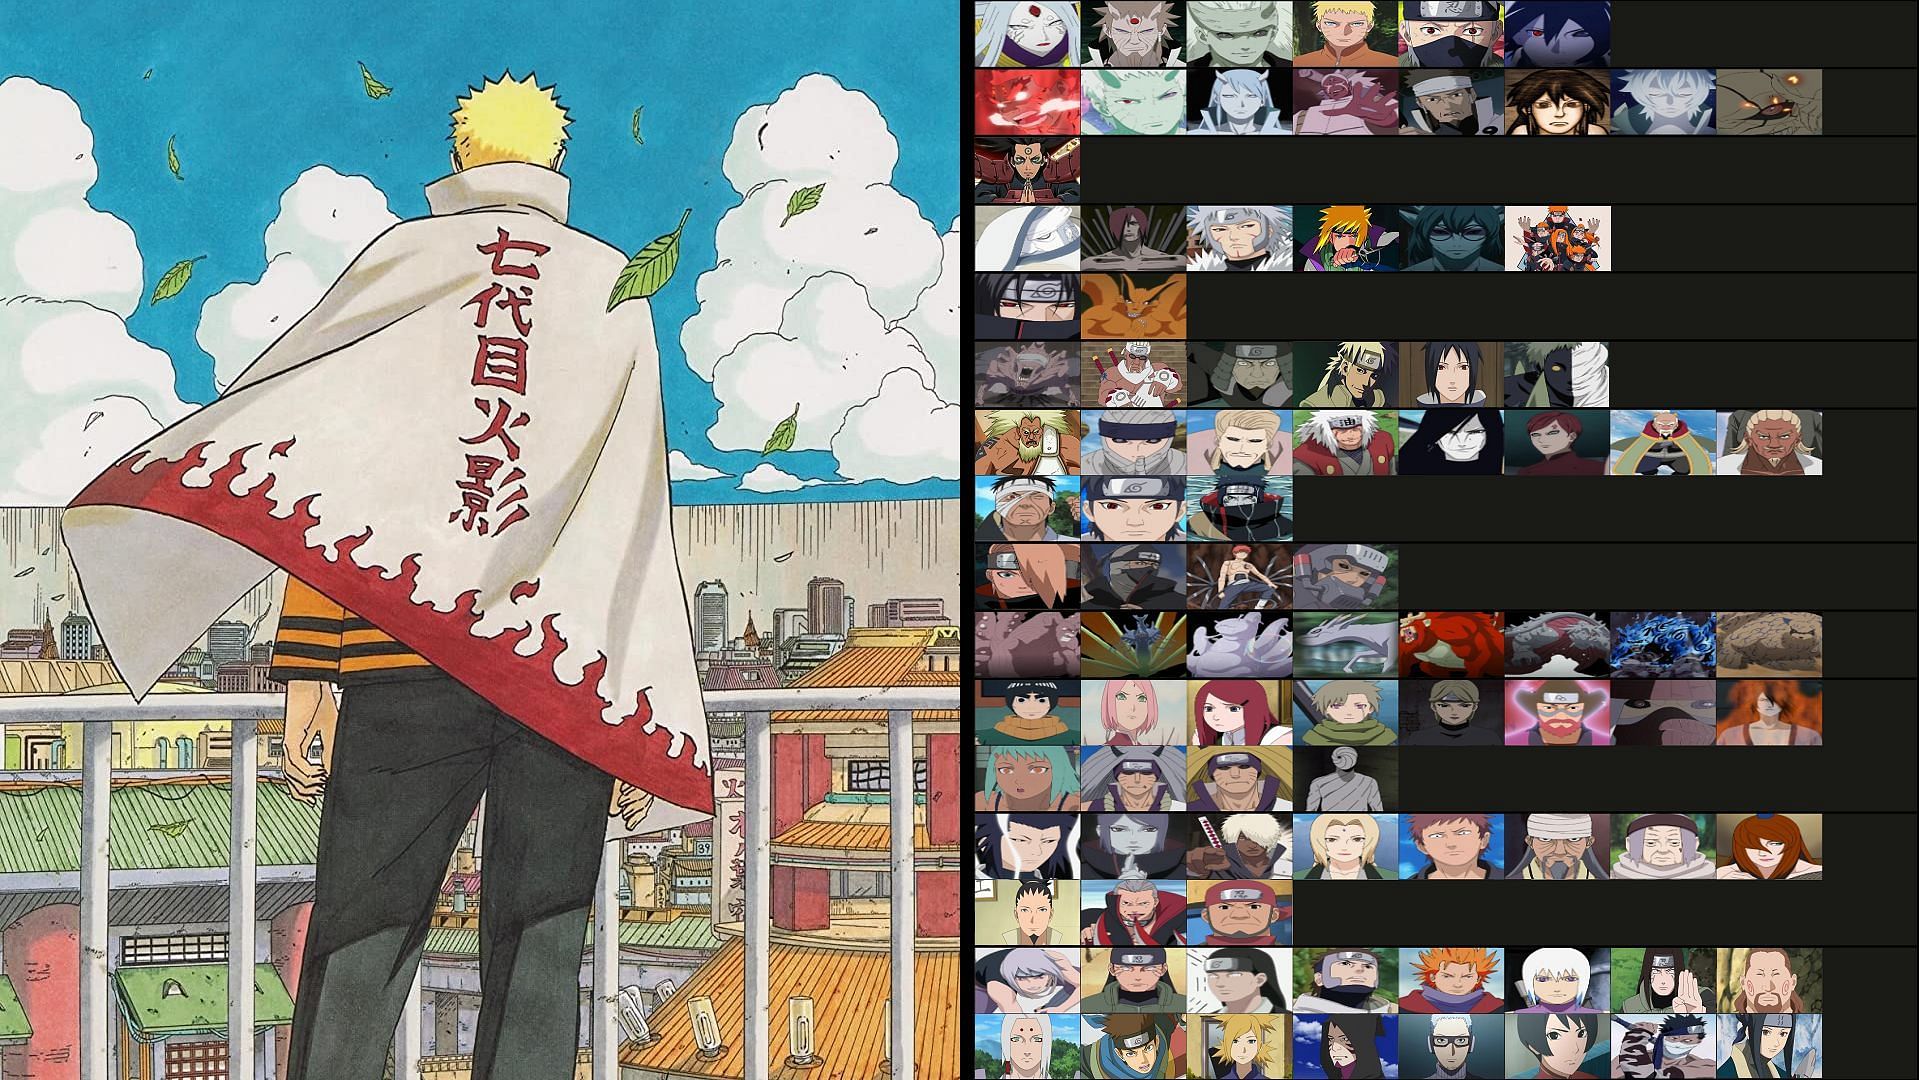 Top 10 Naruto Characters of All Time